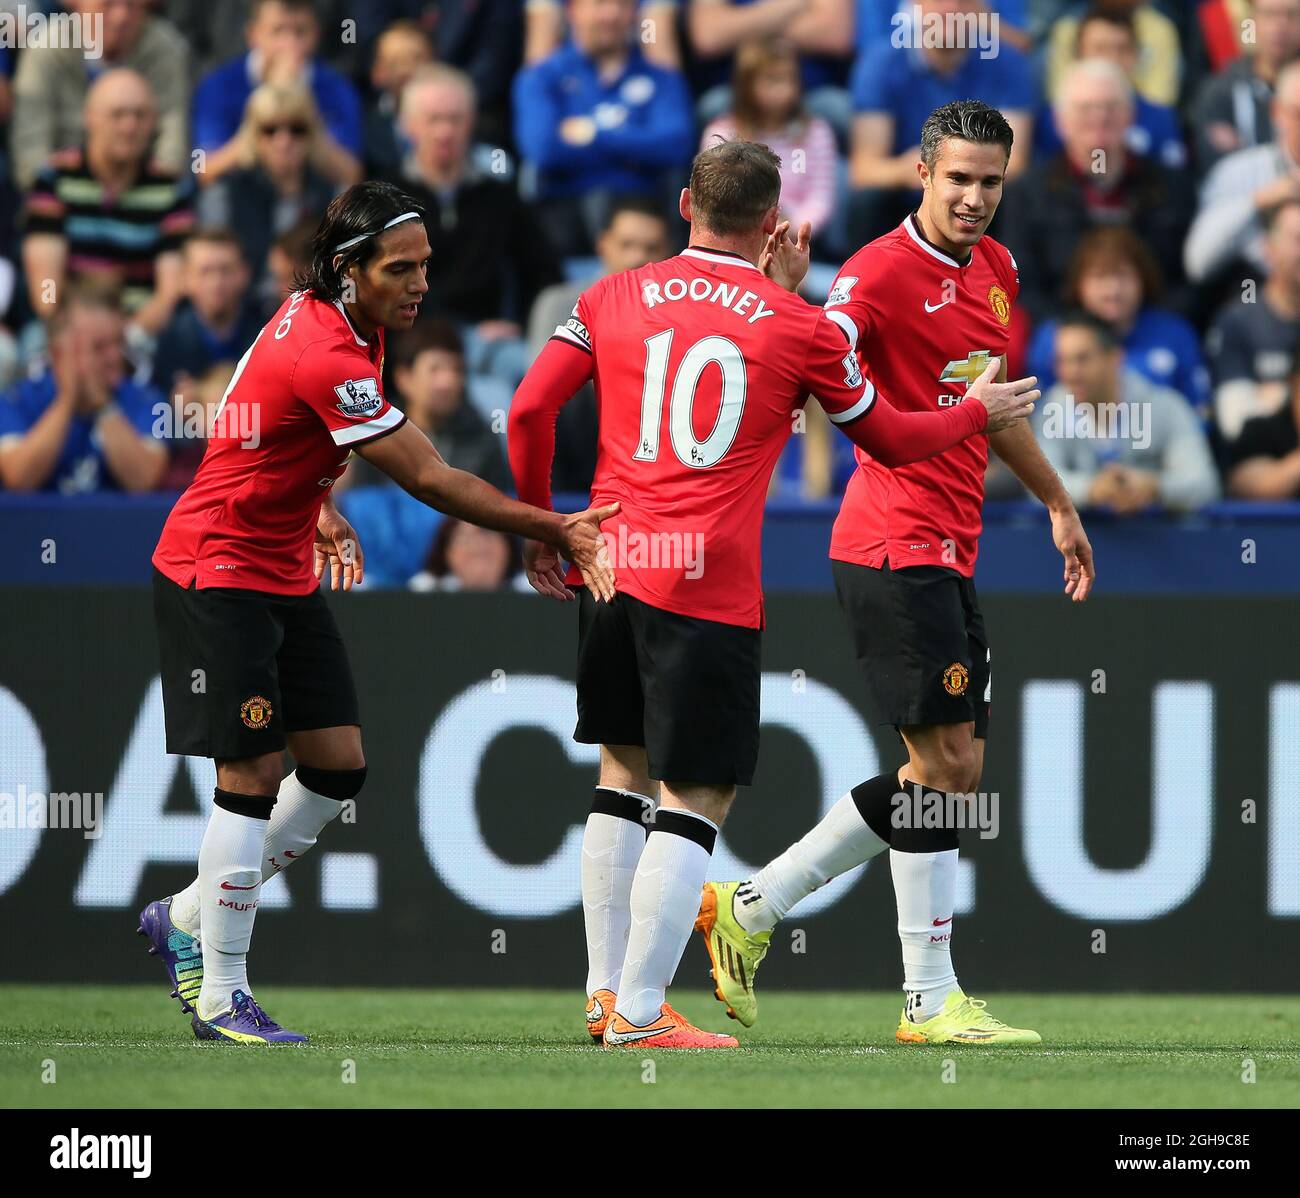 Radamel Falcao of Manchester United and Wayne Rooney of Manchester United celebrate with scorer Robin van Persie of Manchester United (r) - Barclays Premier League during the Barclays Premier League match at King Power Stadium 21 September 2014. Stock Photo